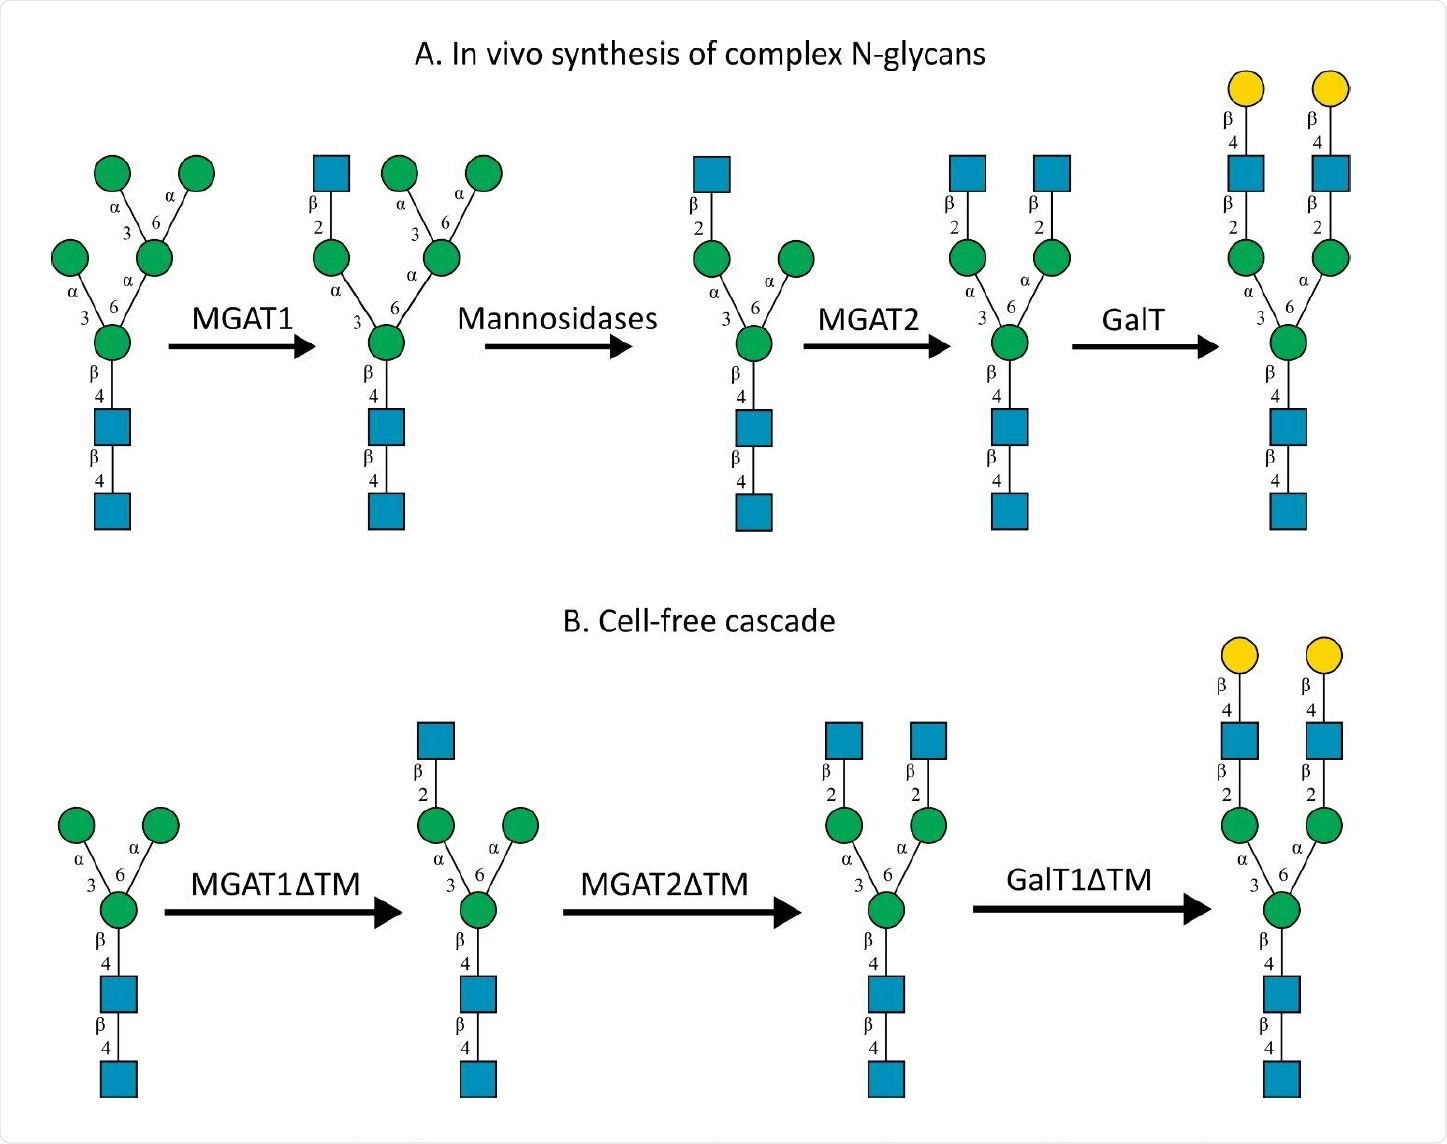 A) In-vivo the oligomannose-type N-glycan Man5 is converted into complex-type glycans by mannosidases and MGAT1, MGAT2 and GalT. Substrates for these reactions are UDP-GlcNAc and UDP-galactose, respectively. B) This process can be remodelled in-vitro to synthesize complex-type structures on insect cell-derived recombinant proteins with paucimannose-type N-glycans, like Man3.